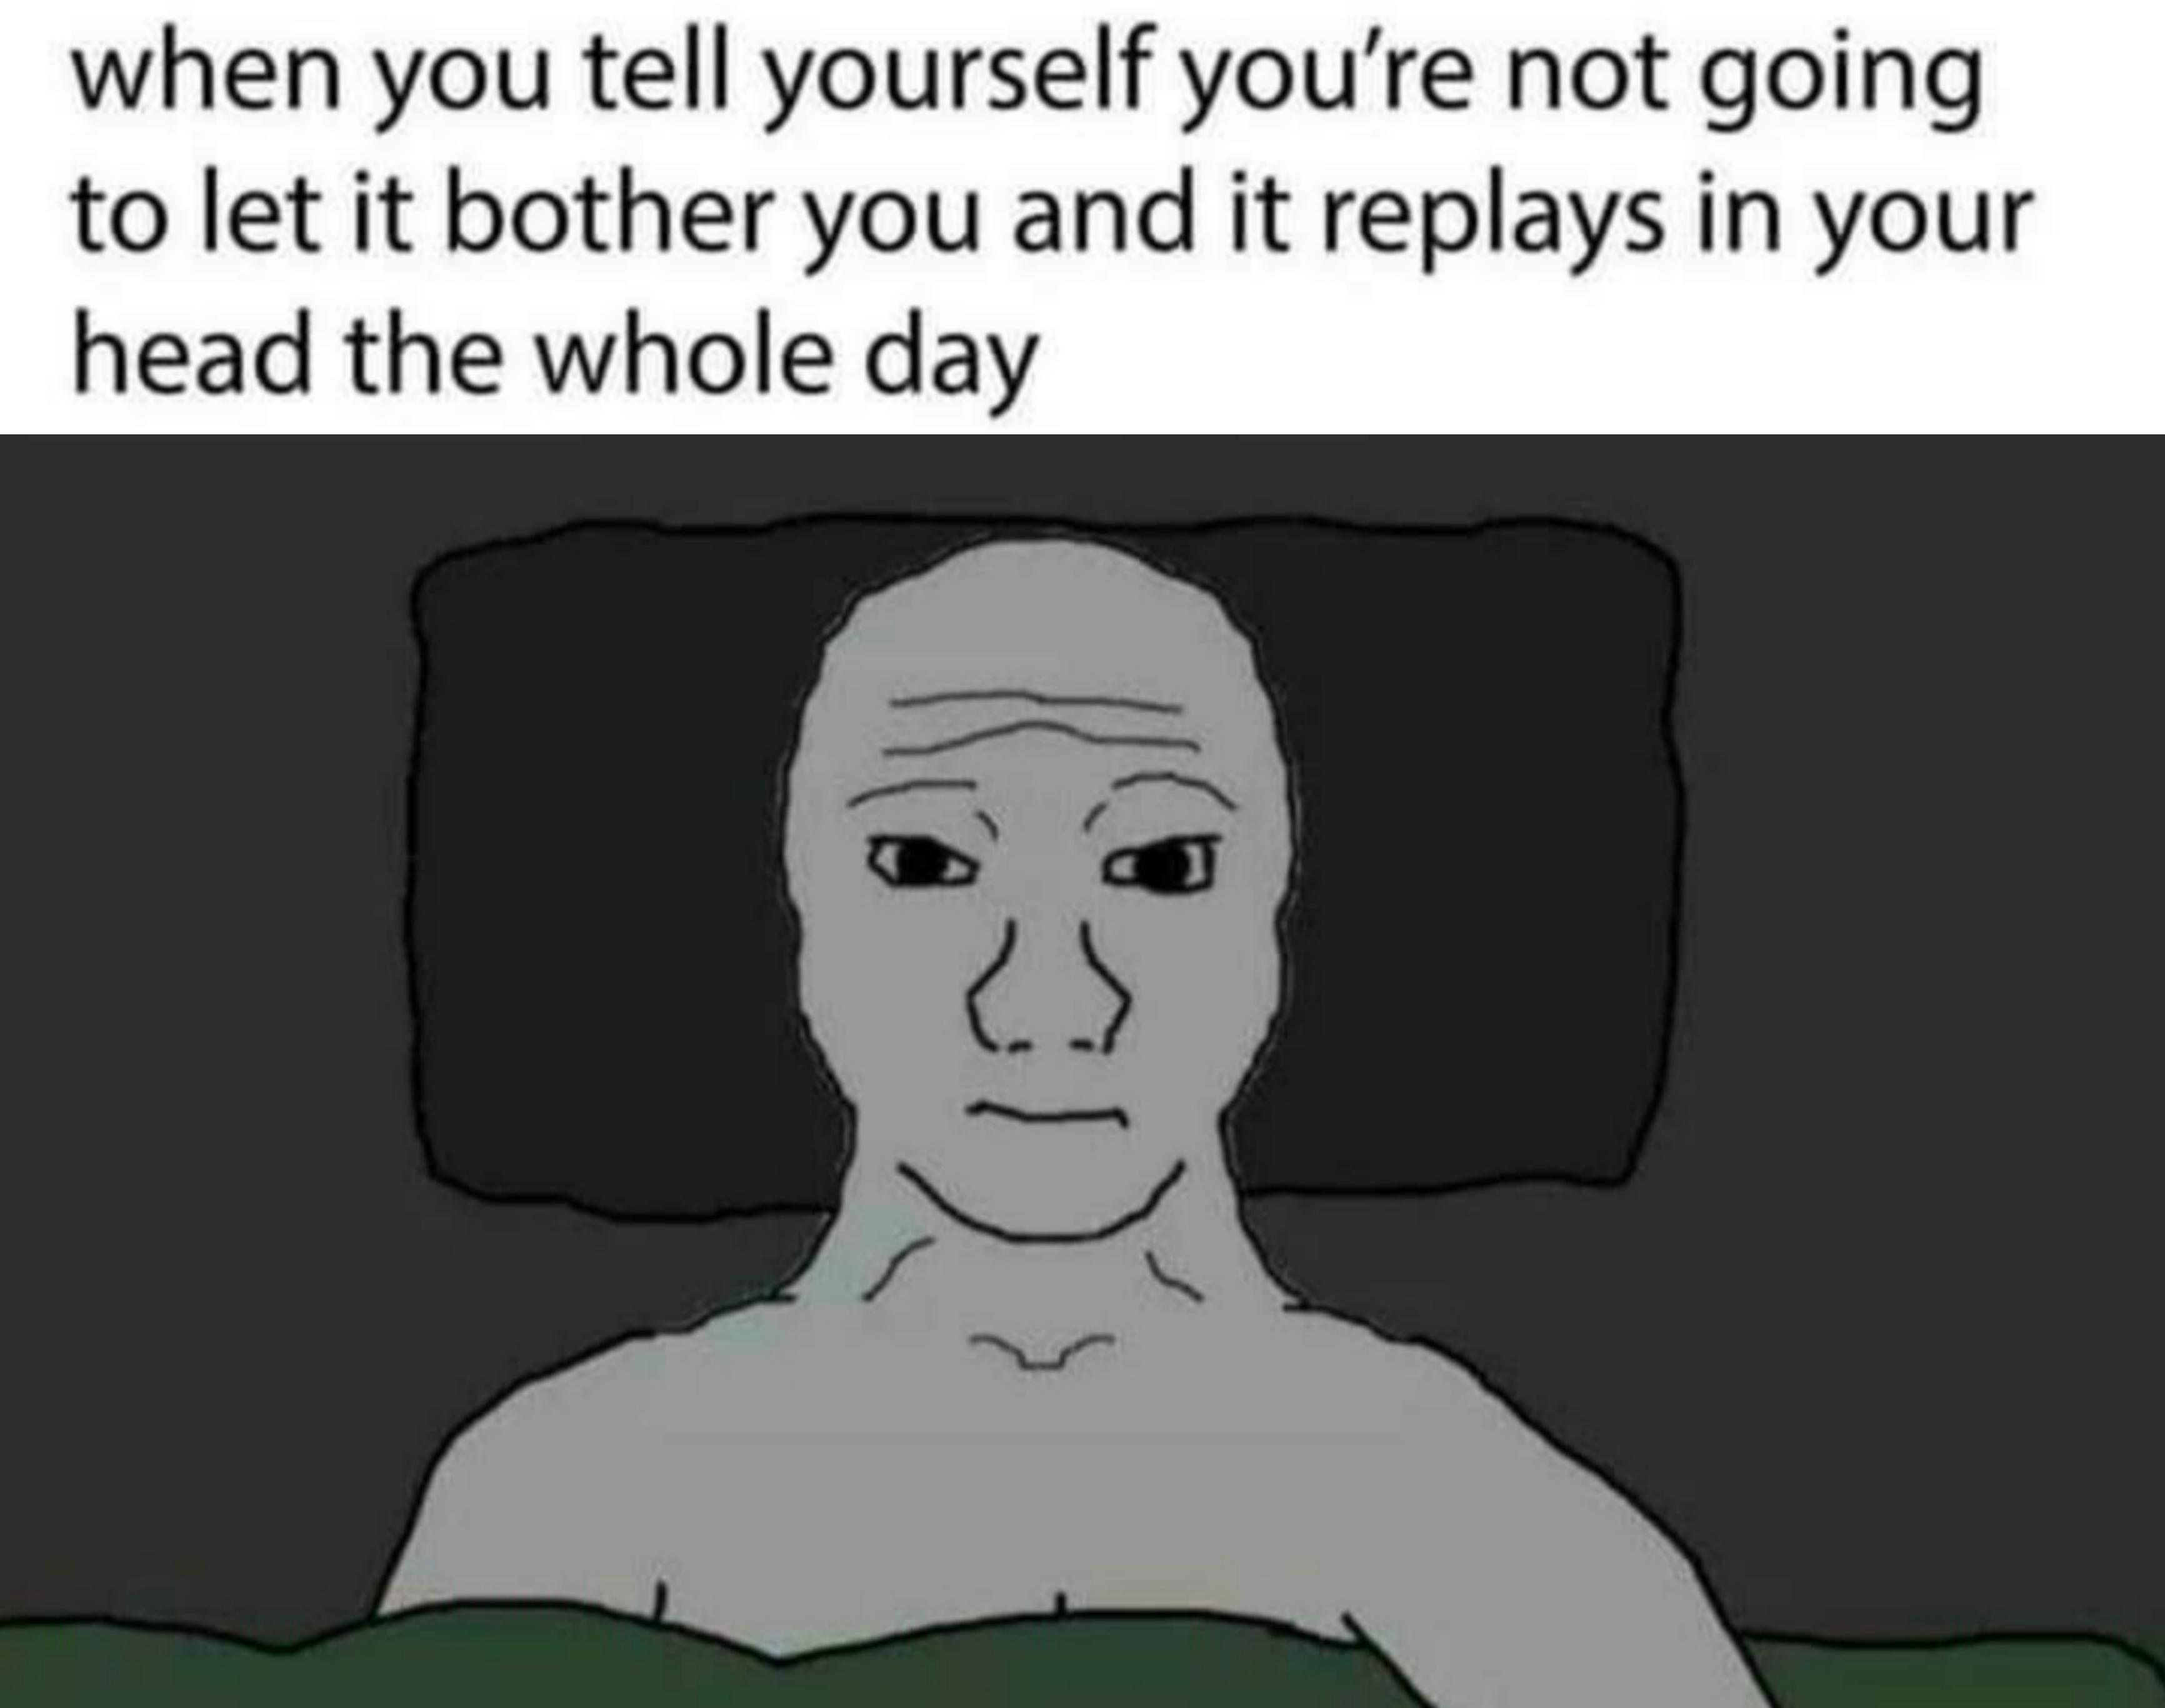 funny memes - dank memes - cartoon - when you tell yourself you're not going to let it bother you and it replays in your head the whole day es